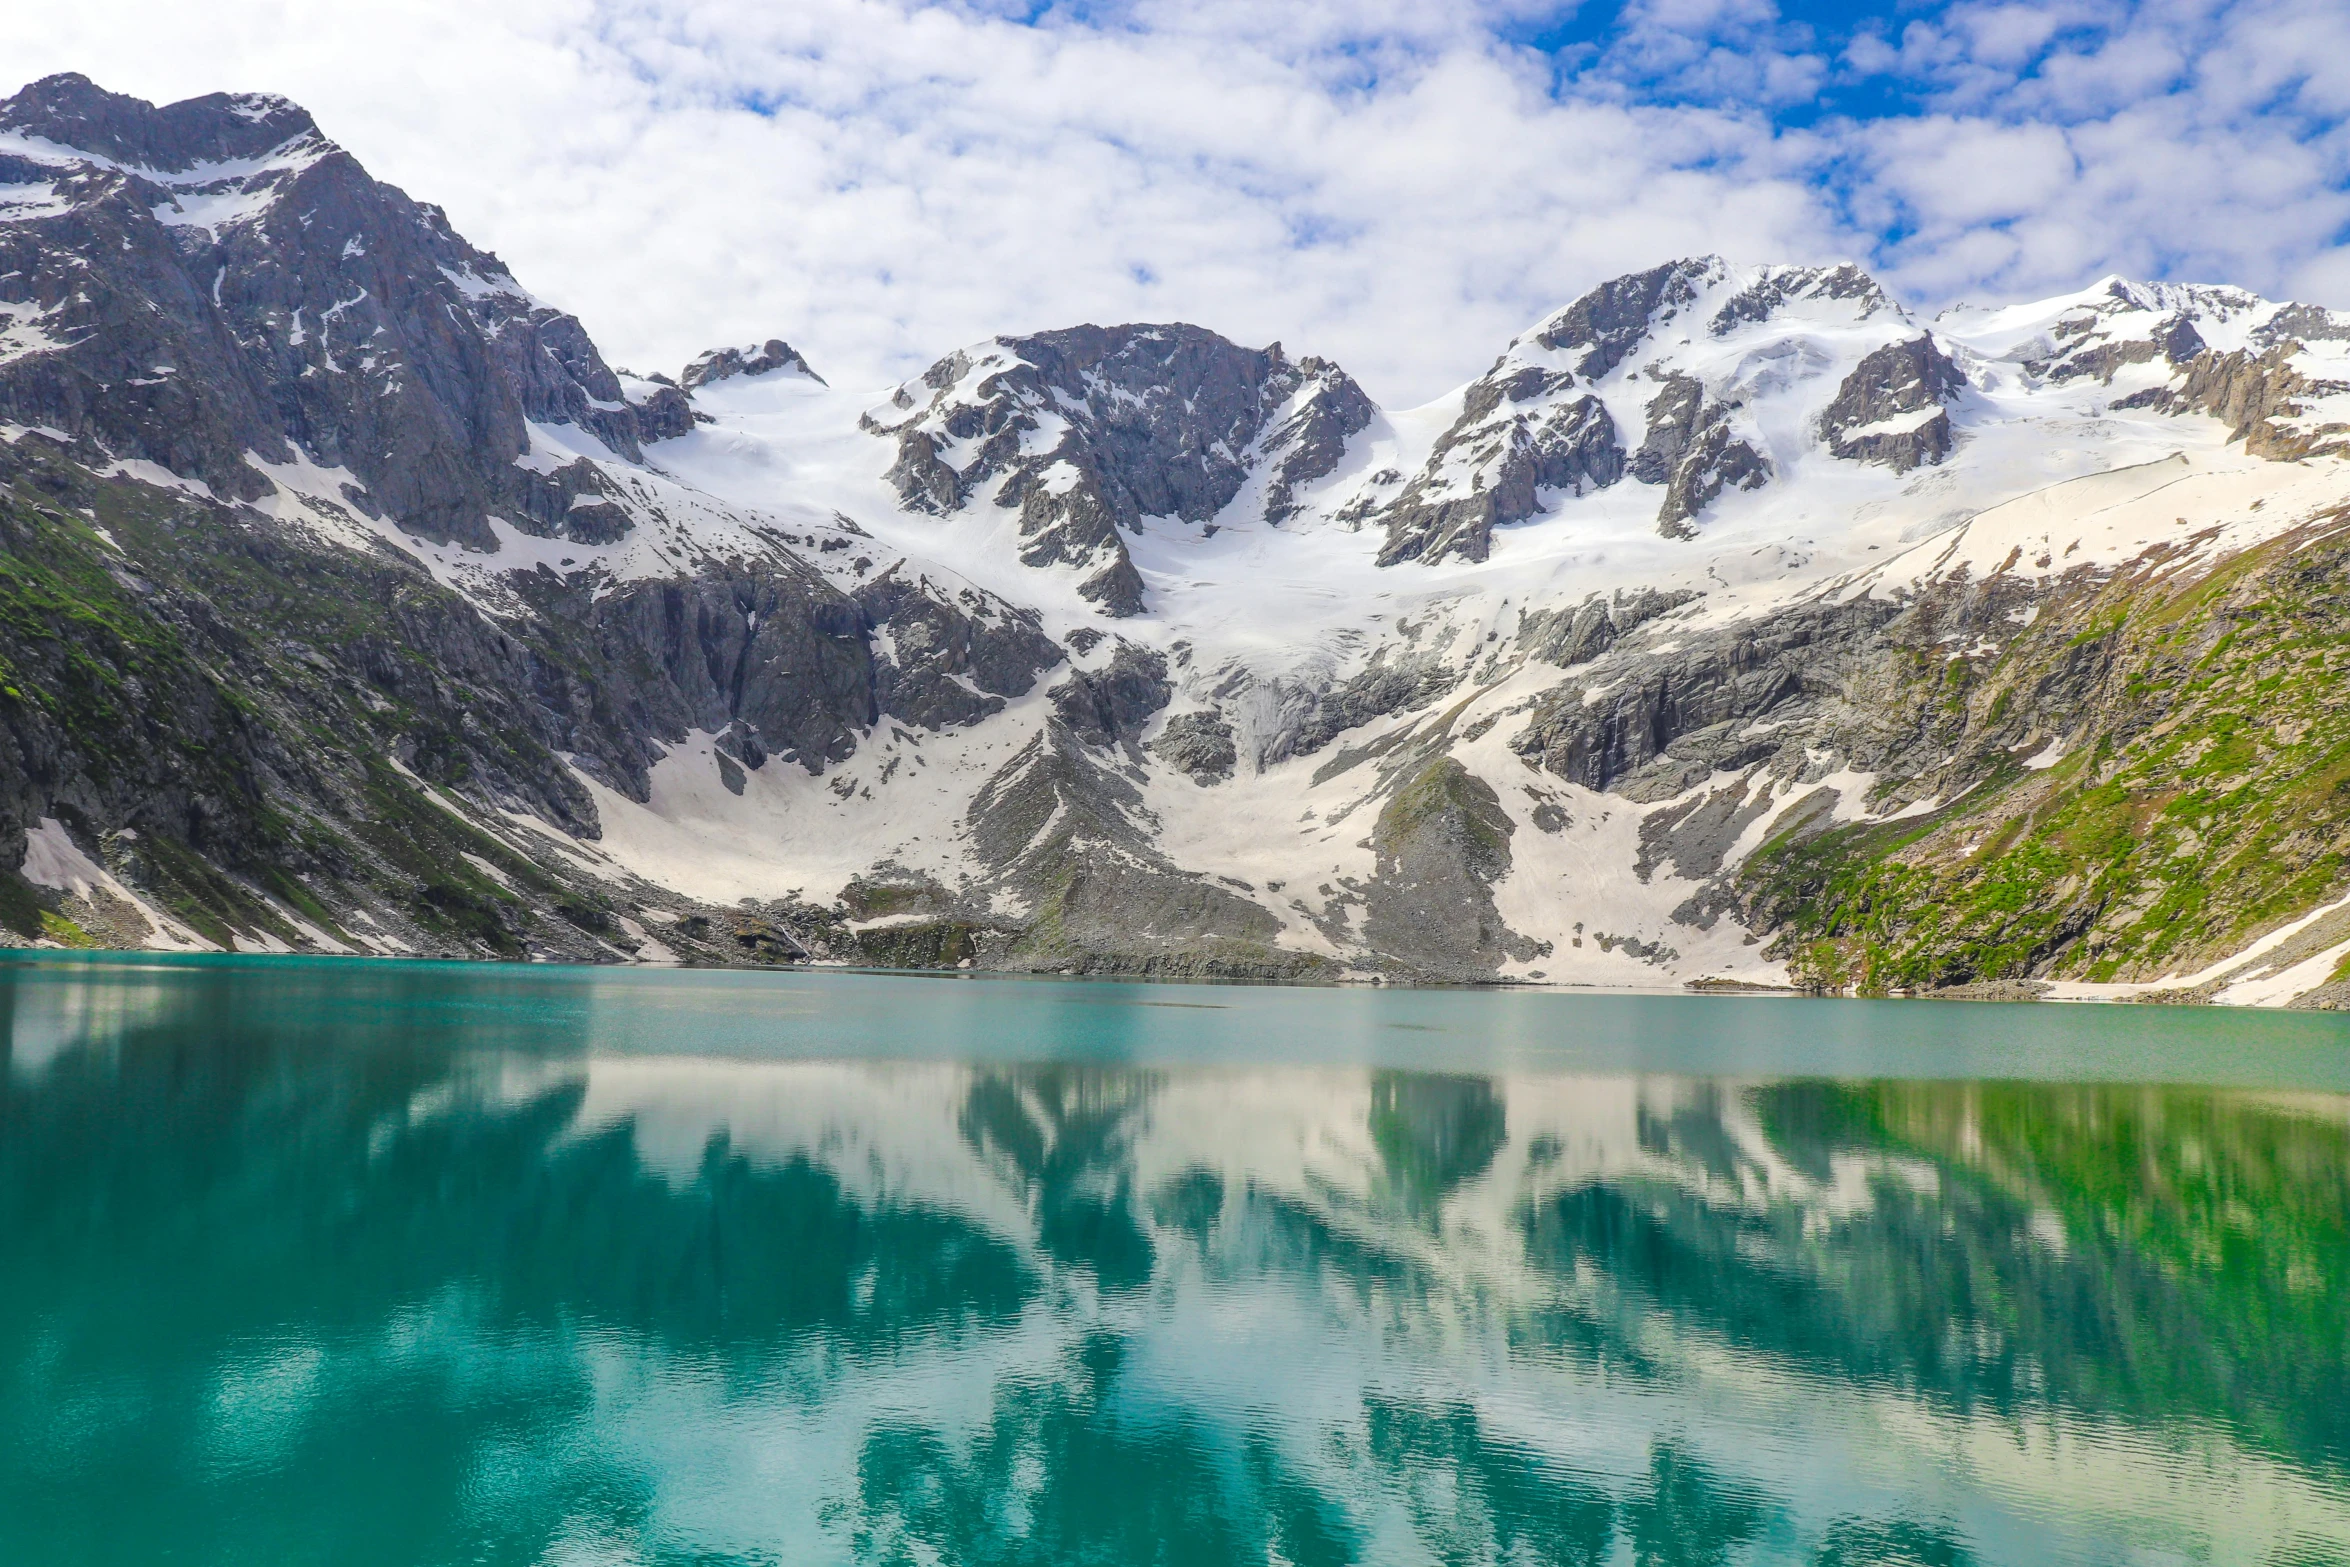 a lake surrounded by snowy mountains and clouds